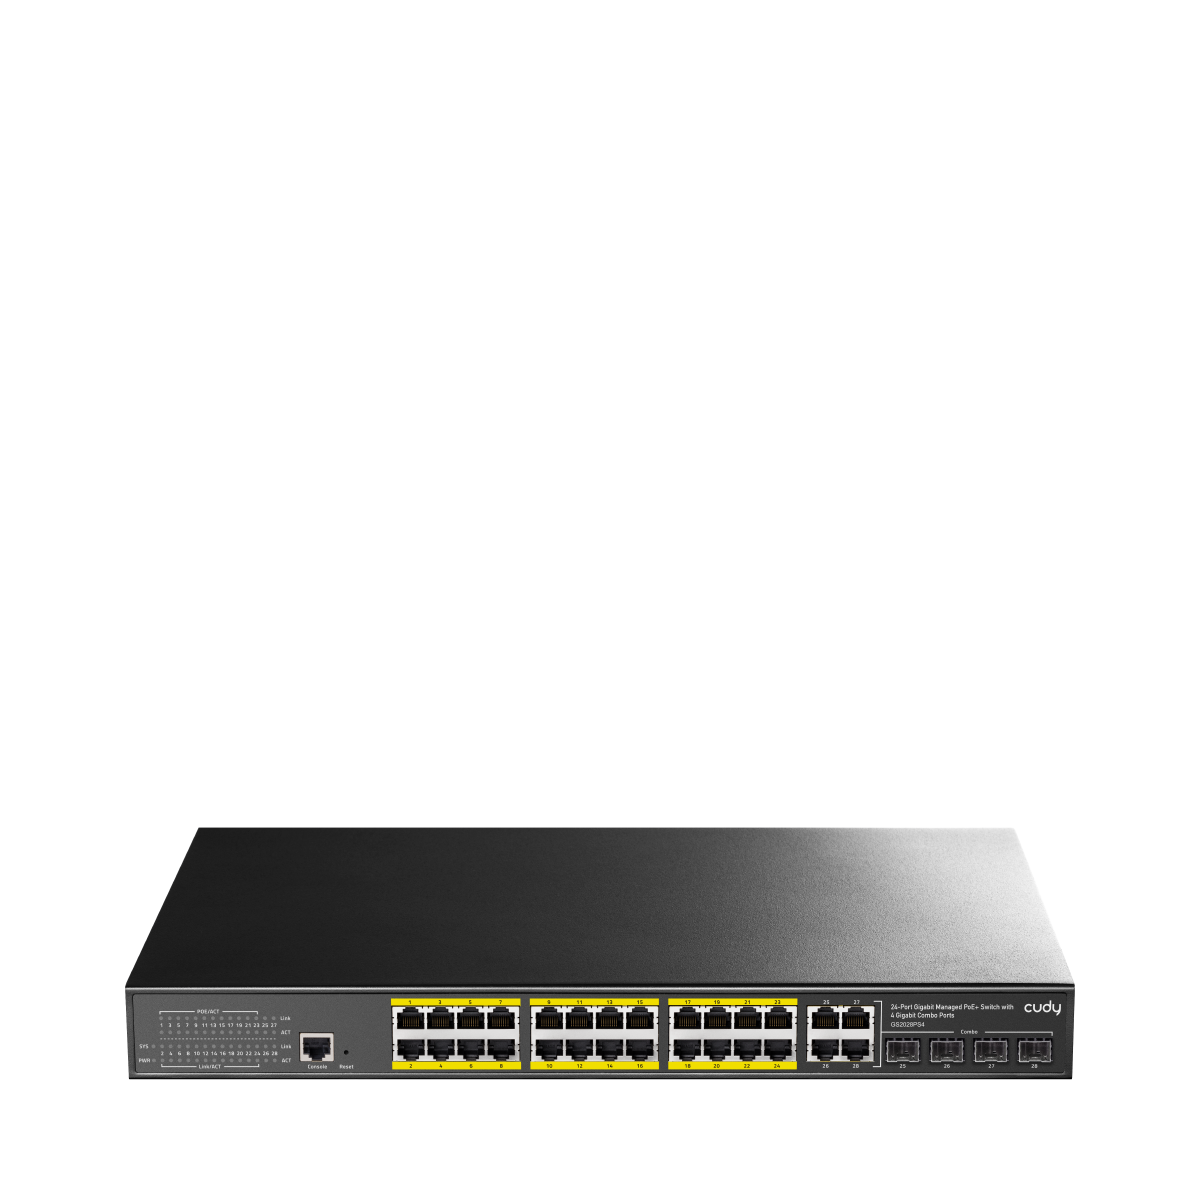 GS2028PS4-300W	24-Port Layer 2 Managed Gigabit PoE+ Switch with 4 Gigabit Combo Ports, 300W